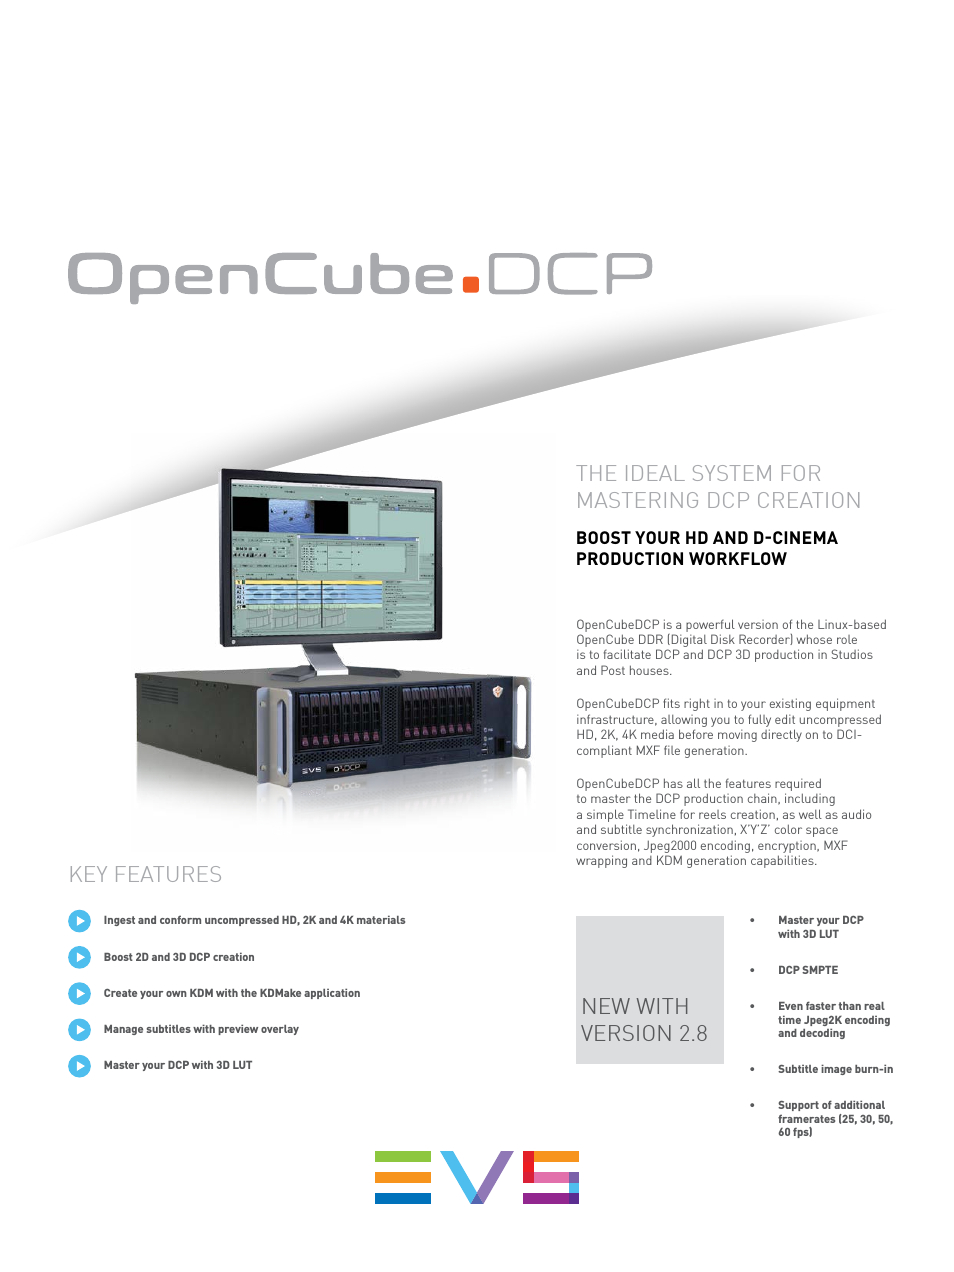 OpenCube DCP